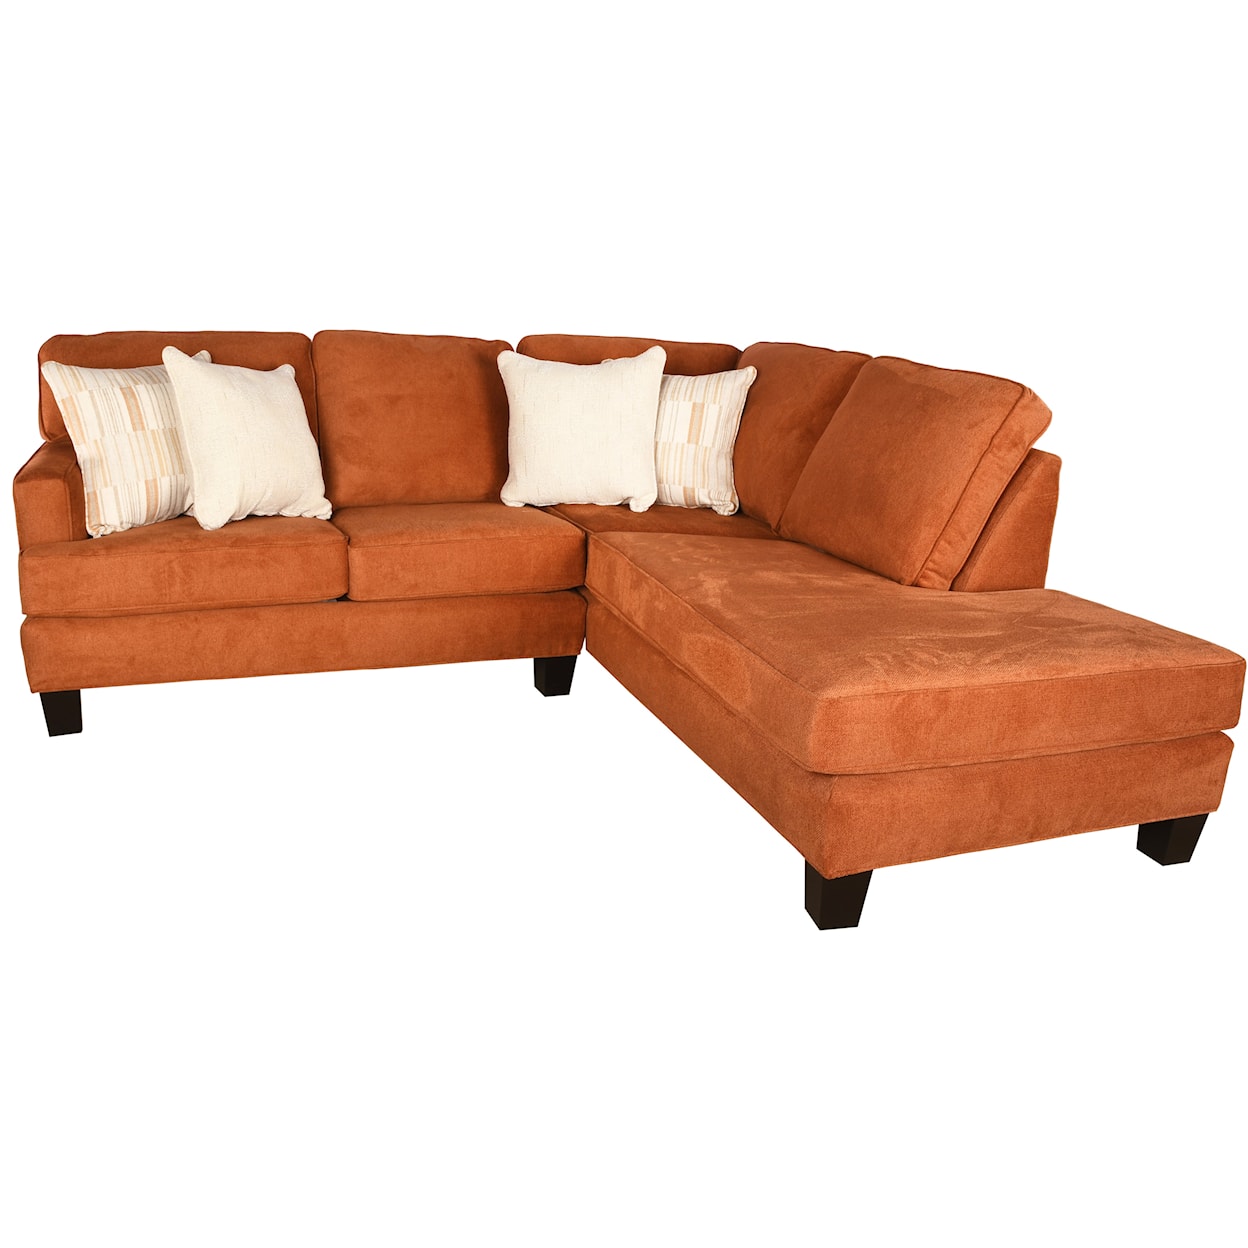 Southside Designs 9671 2 Pc. Sectional